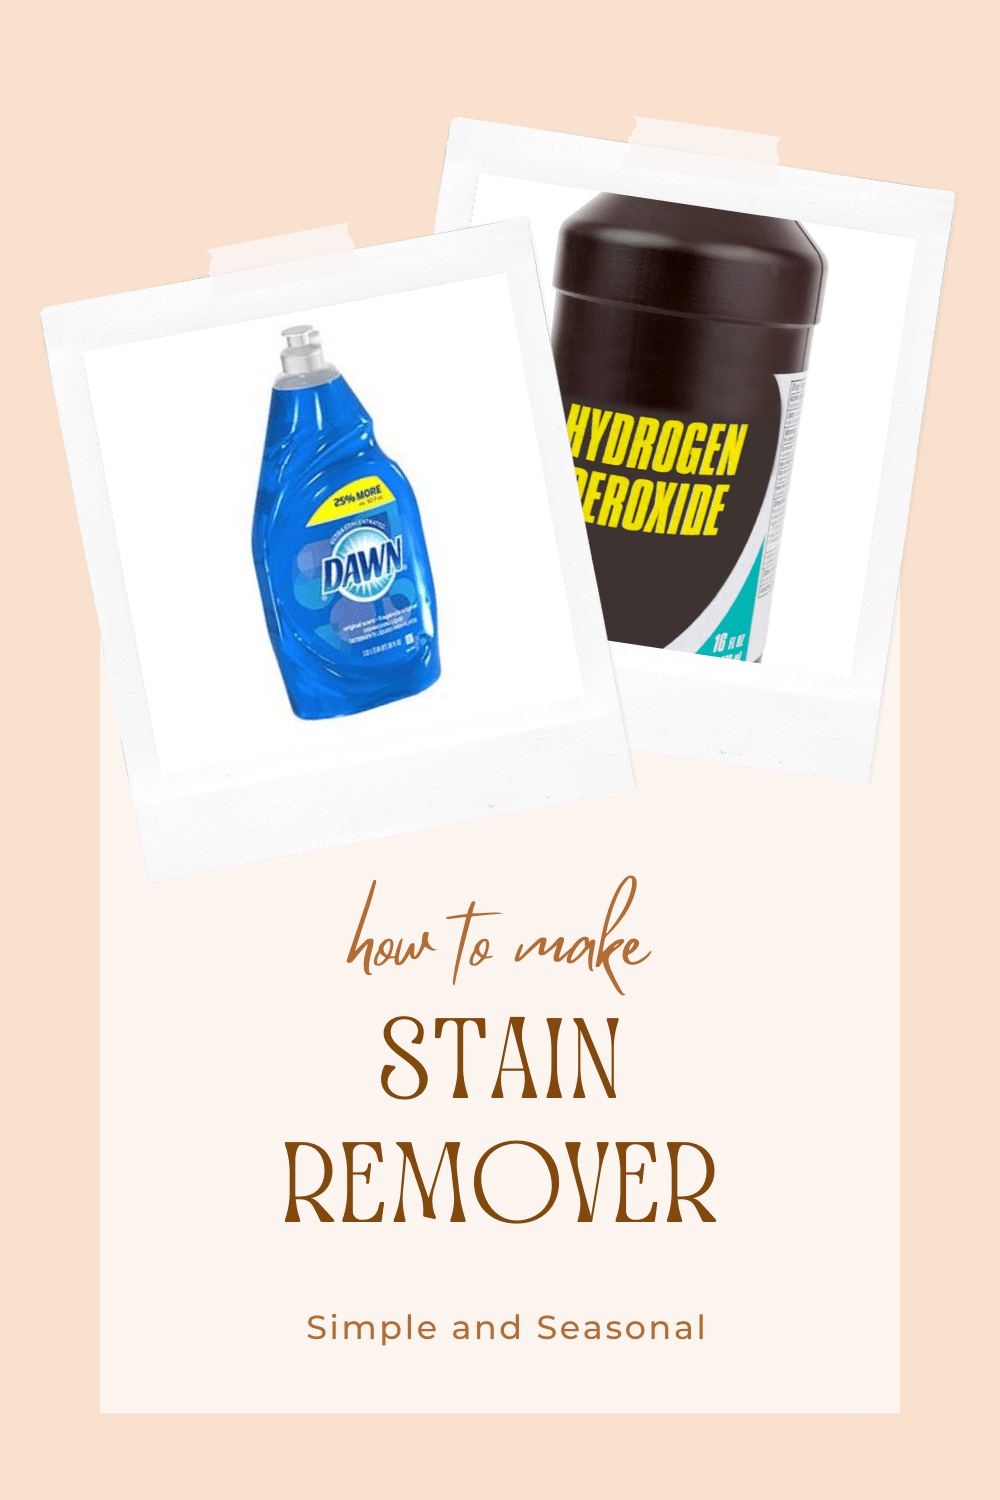 Mix up this homemade stain remover for clothes and have those greasy stained shirts looking new again! via @nmburk